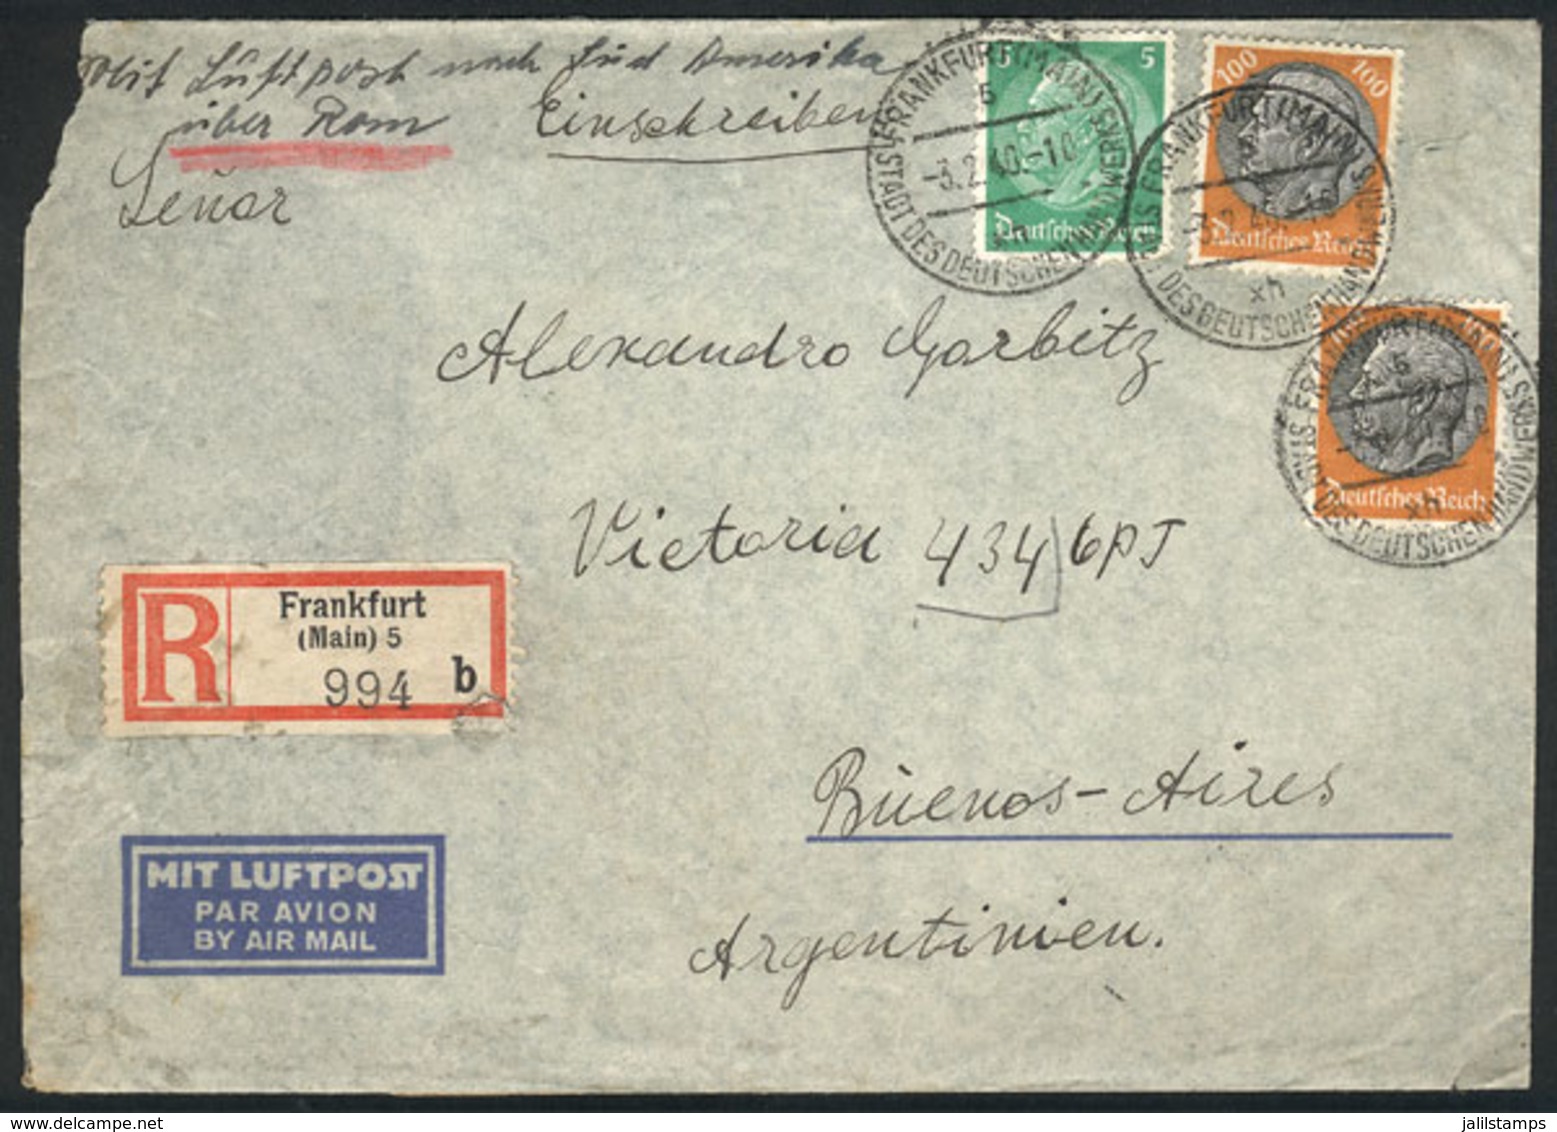 GERMANY: Registered Airmail Cover (with Original Letter Included) Sent From Frankfurt To Buenos Aires On 3/FE/1940, Fran - Vorphilatelie